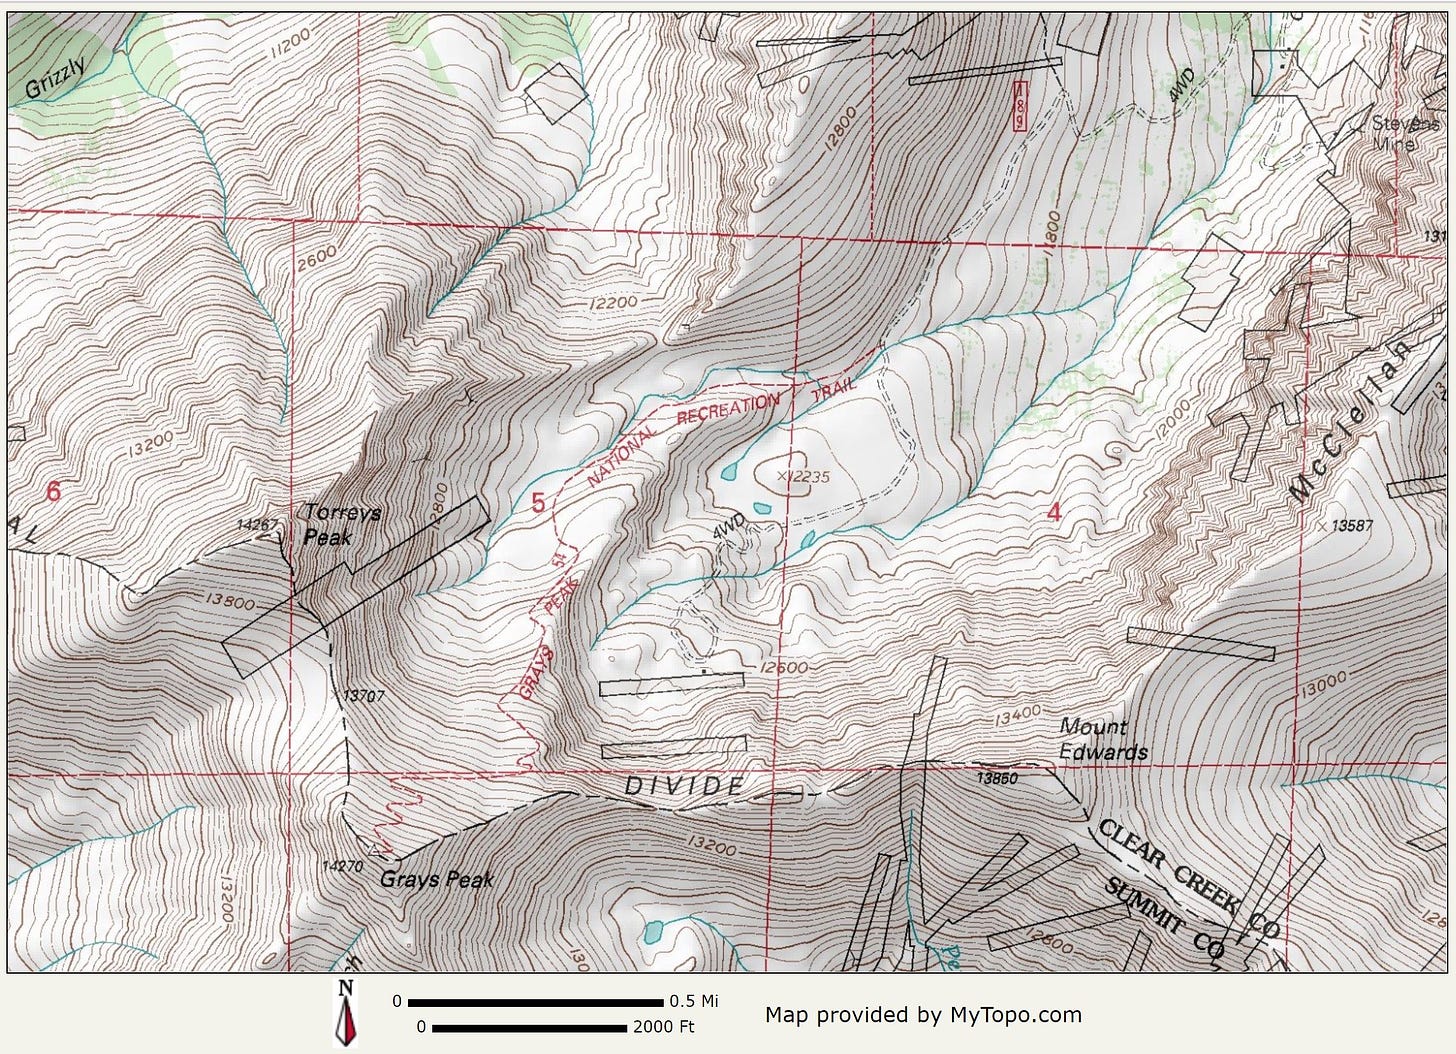 A topographical map of Grays and Torreys Peaks